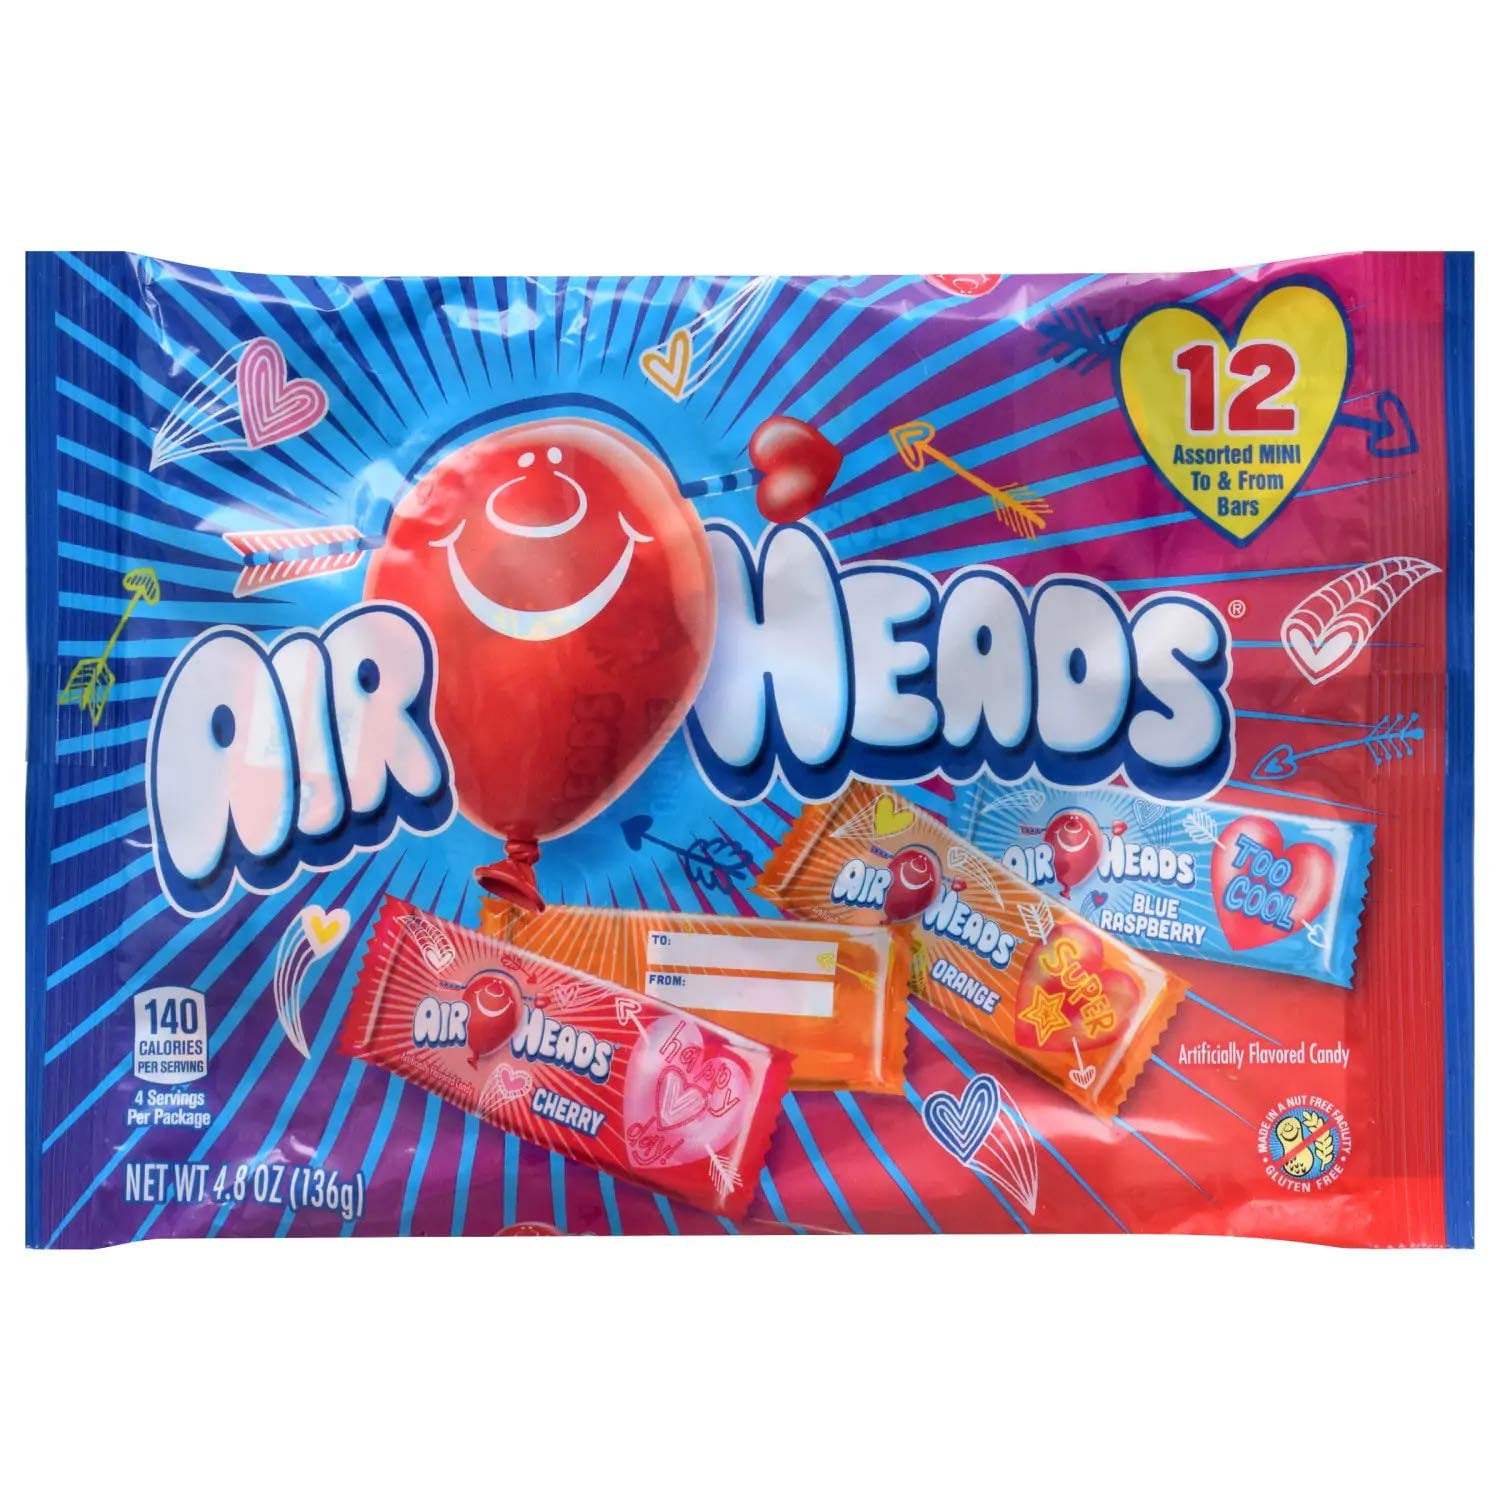 Download Airheads (1) 12pc Bag Assorted Mini Candy Bars - Cherry ...